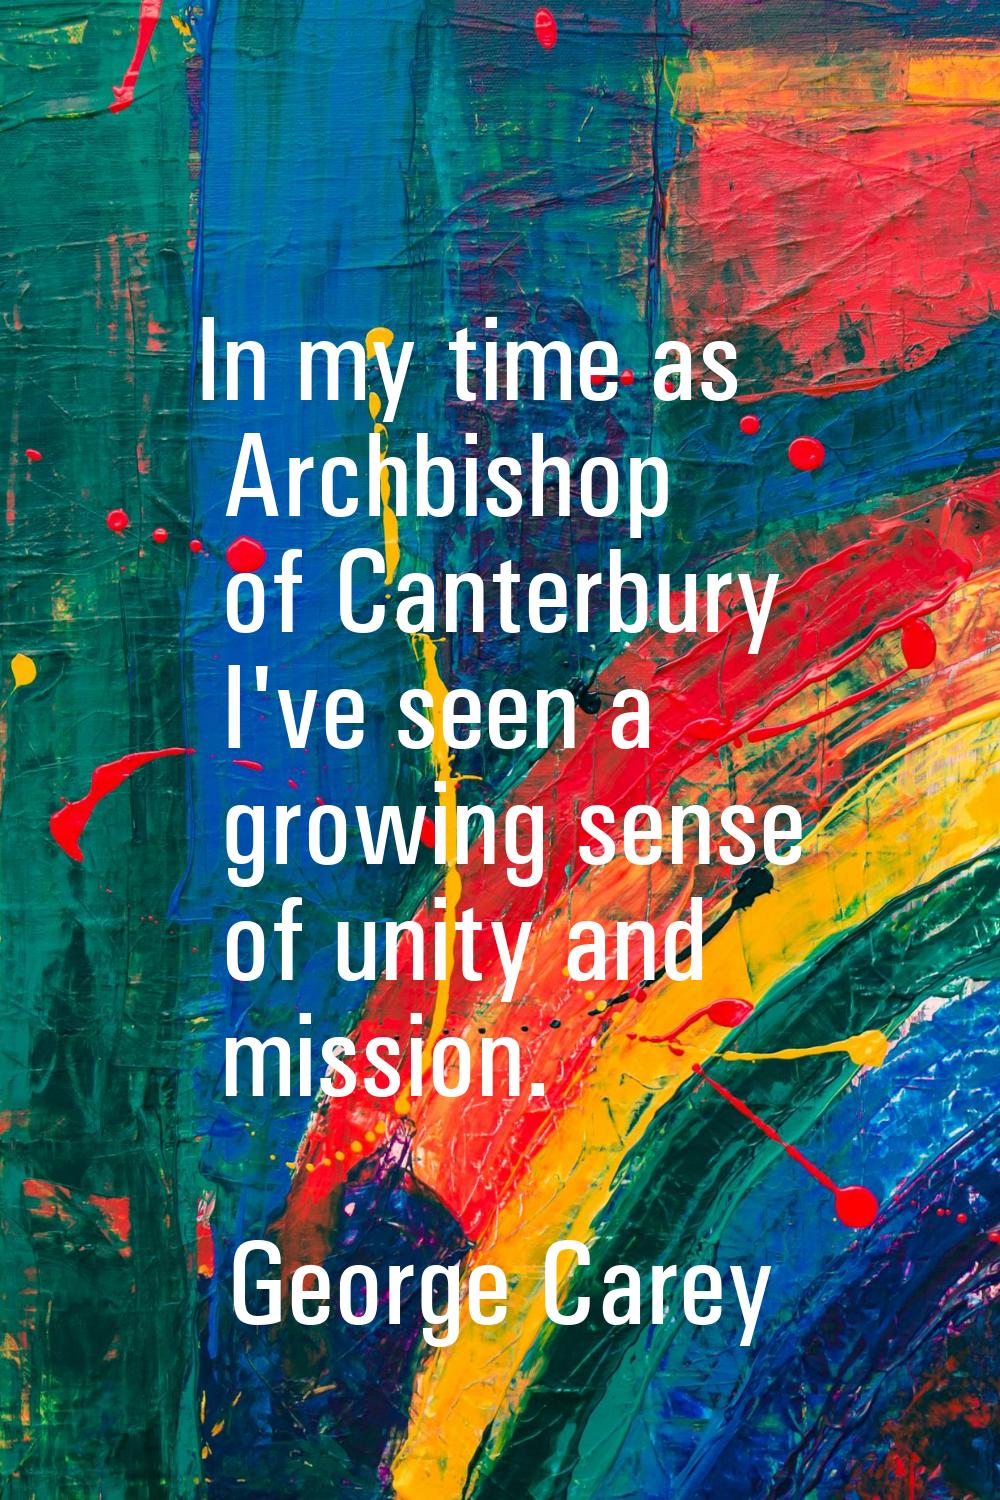 In my time as Archbishop of Canterbury I've seen a growing sense of unity and mission.